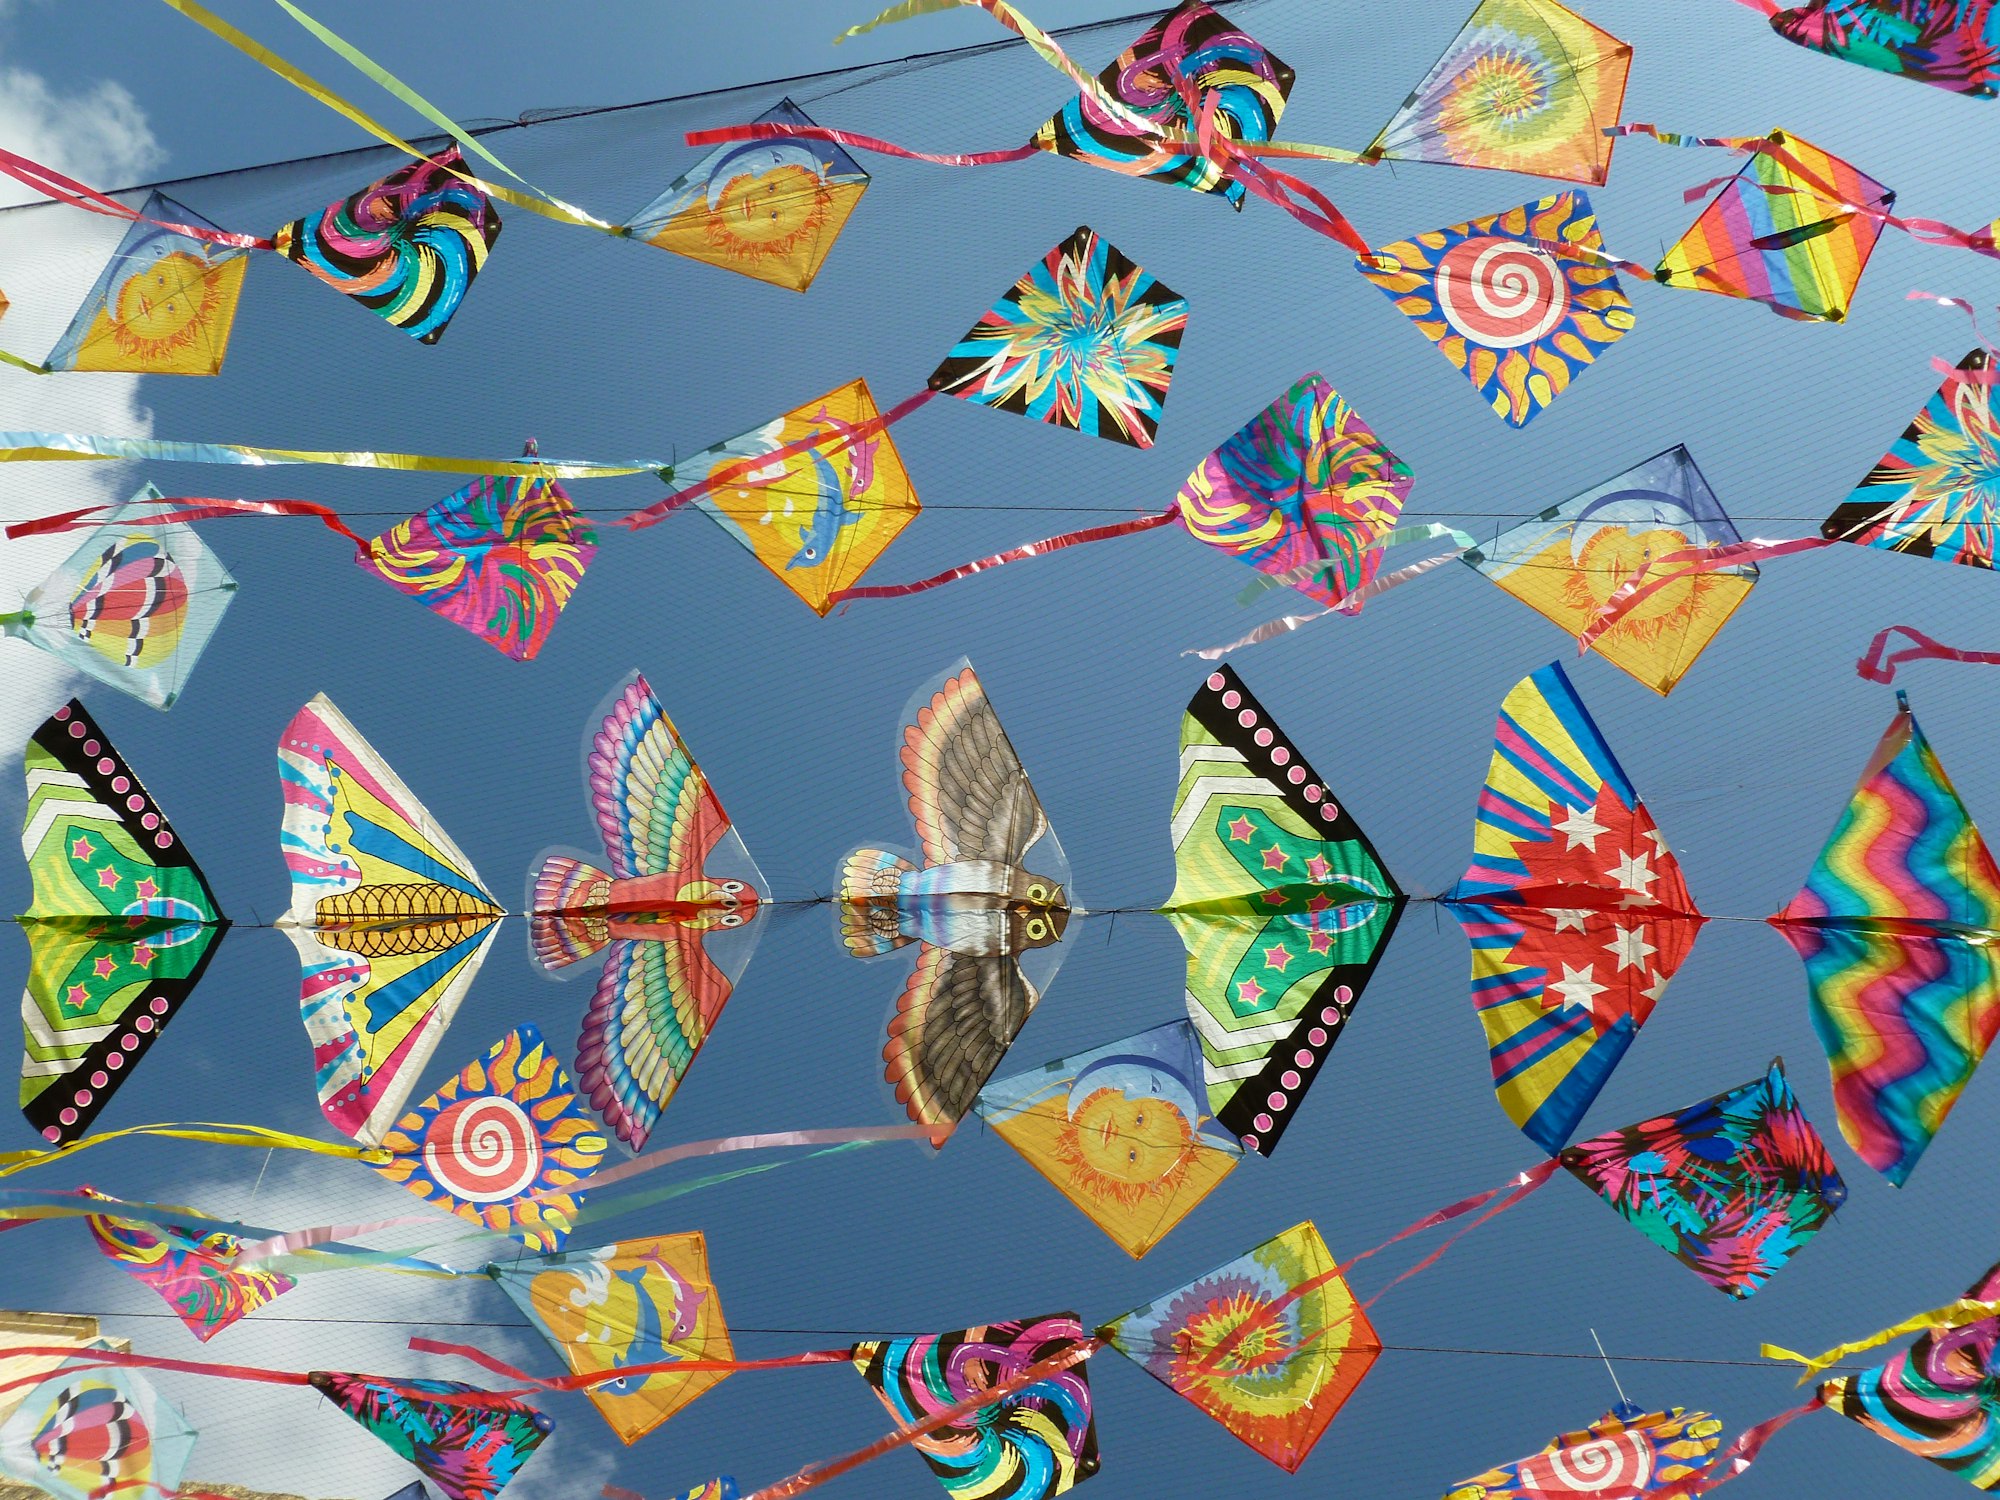 beautiful colorful kites all lined up in the air